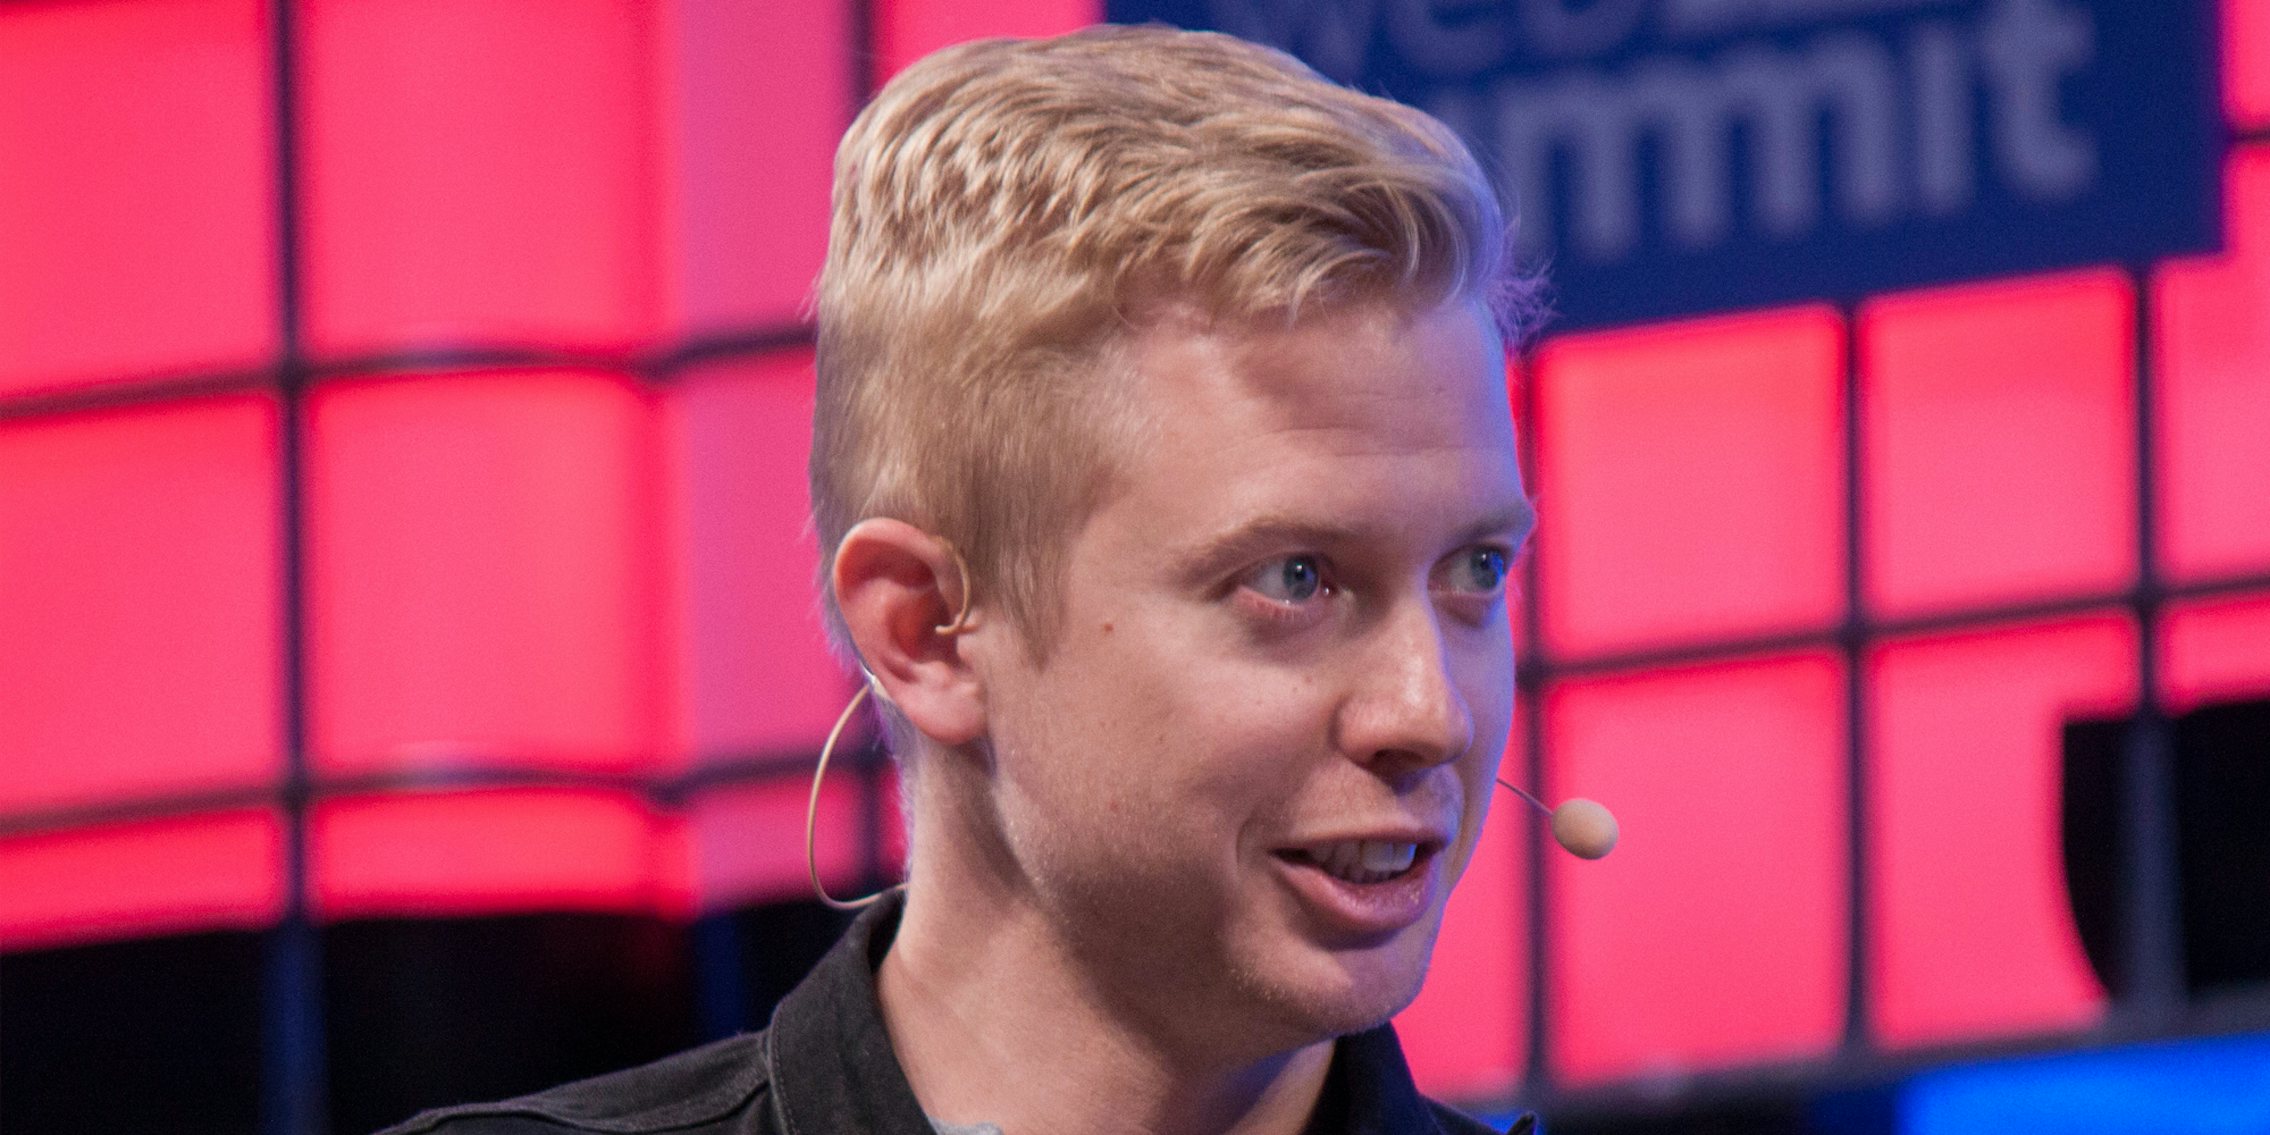 Steve Huffman speaking in front of pink and blue background